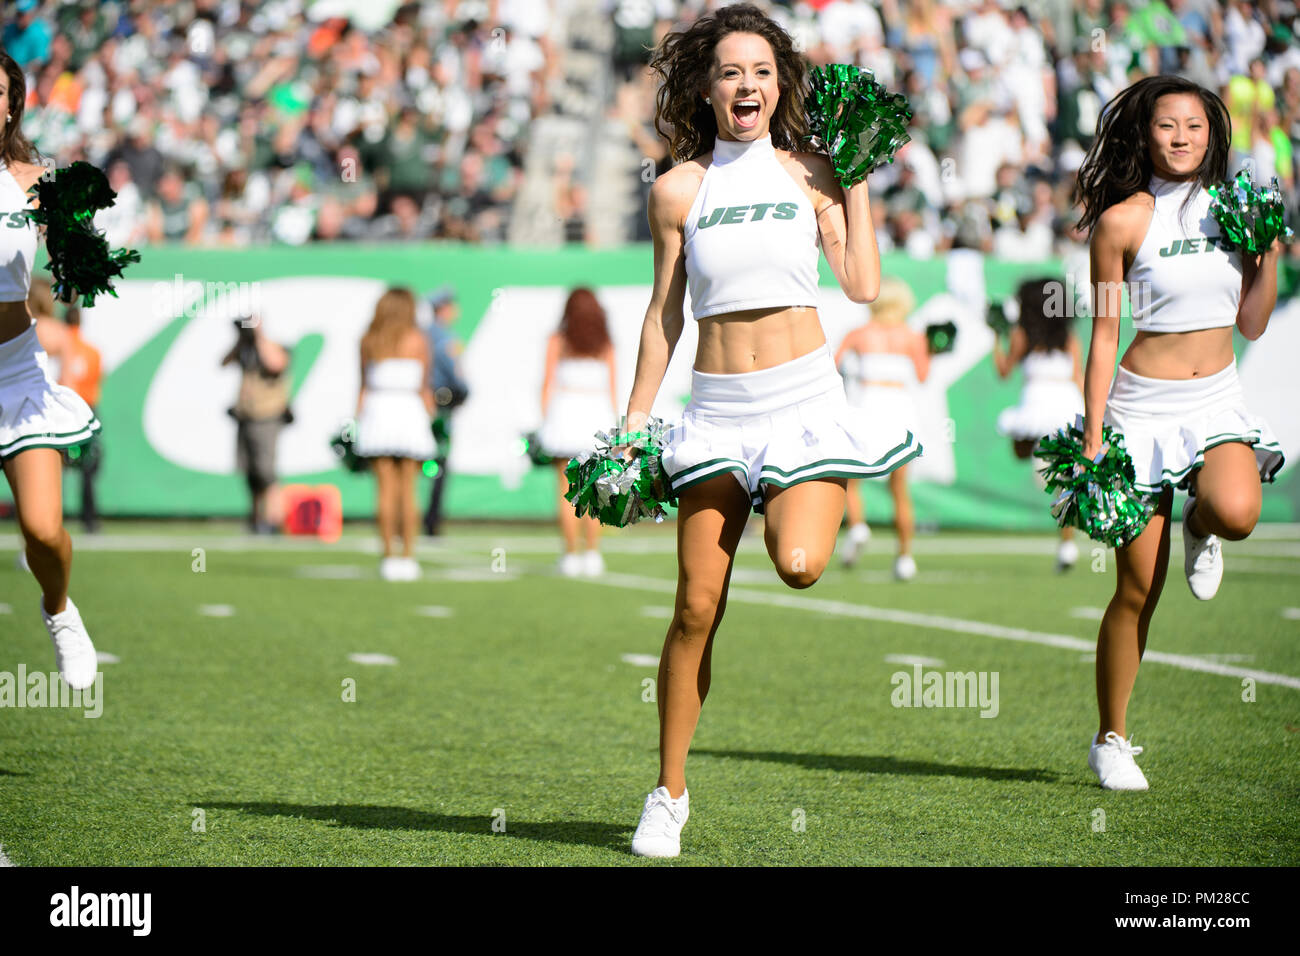 East Rutherford, NJ, USA. 16th Sep, 2018. The New York Jets Flight Crew performs during the game between The New York Jets and The Miami Dolphins at Met Life Stadium in East Rutherford, NJ. The Miami Dolphins defeat The New York Jets 20-12. Mandatory Credit: Kostas Lymperopoulos/CSM/Alamy Live News Stock Photo